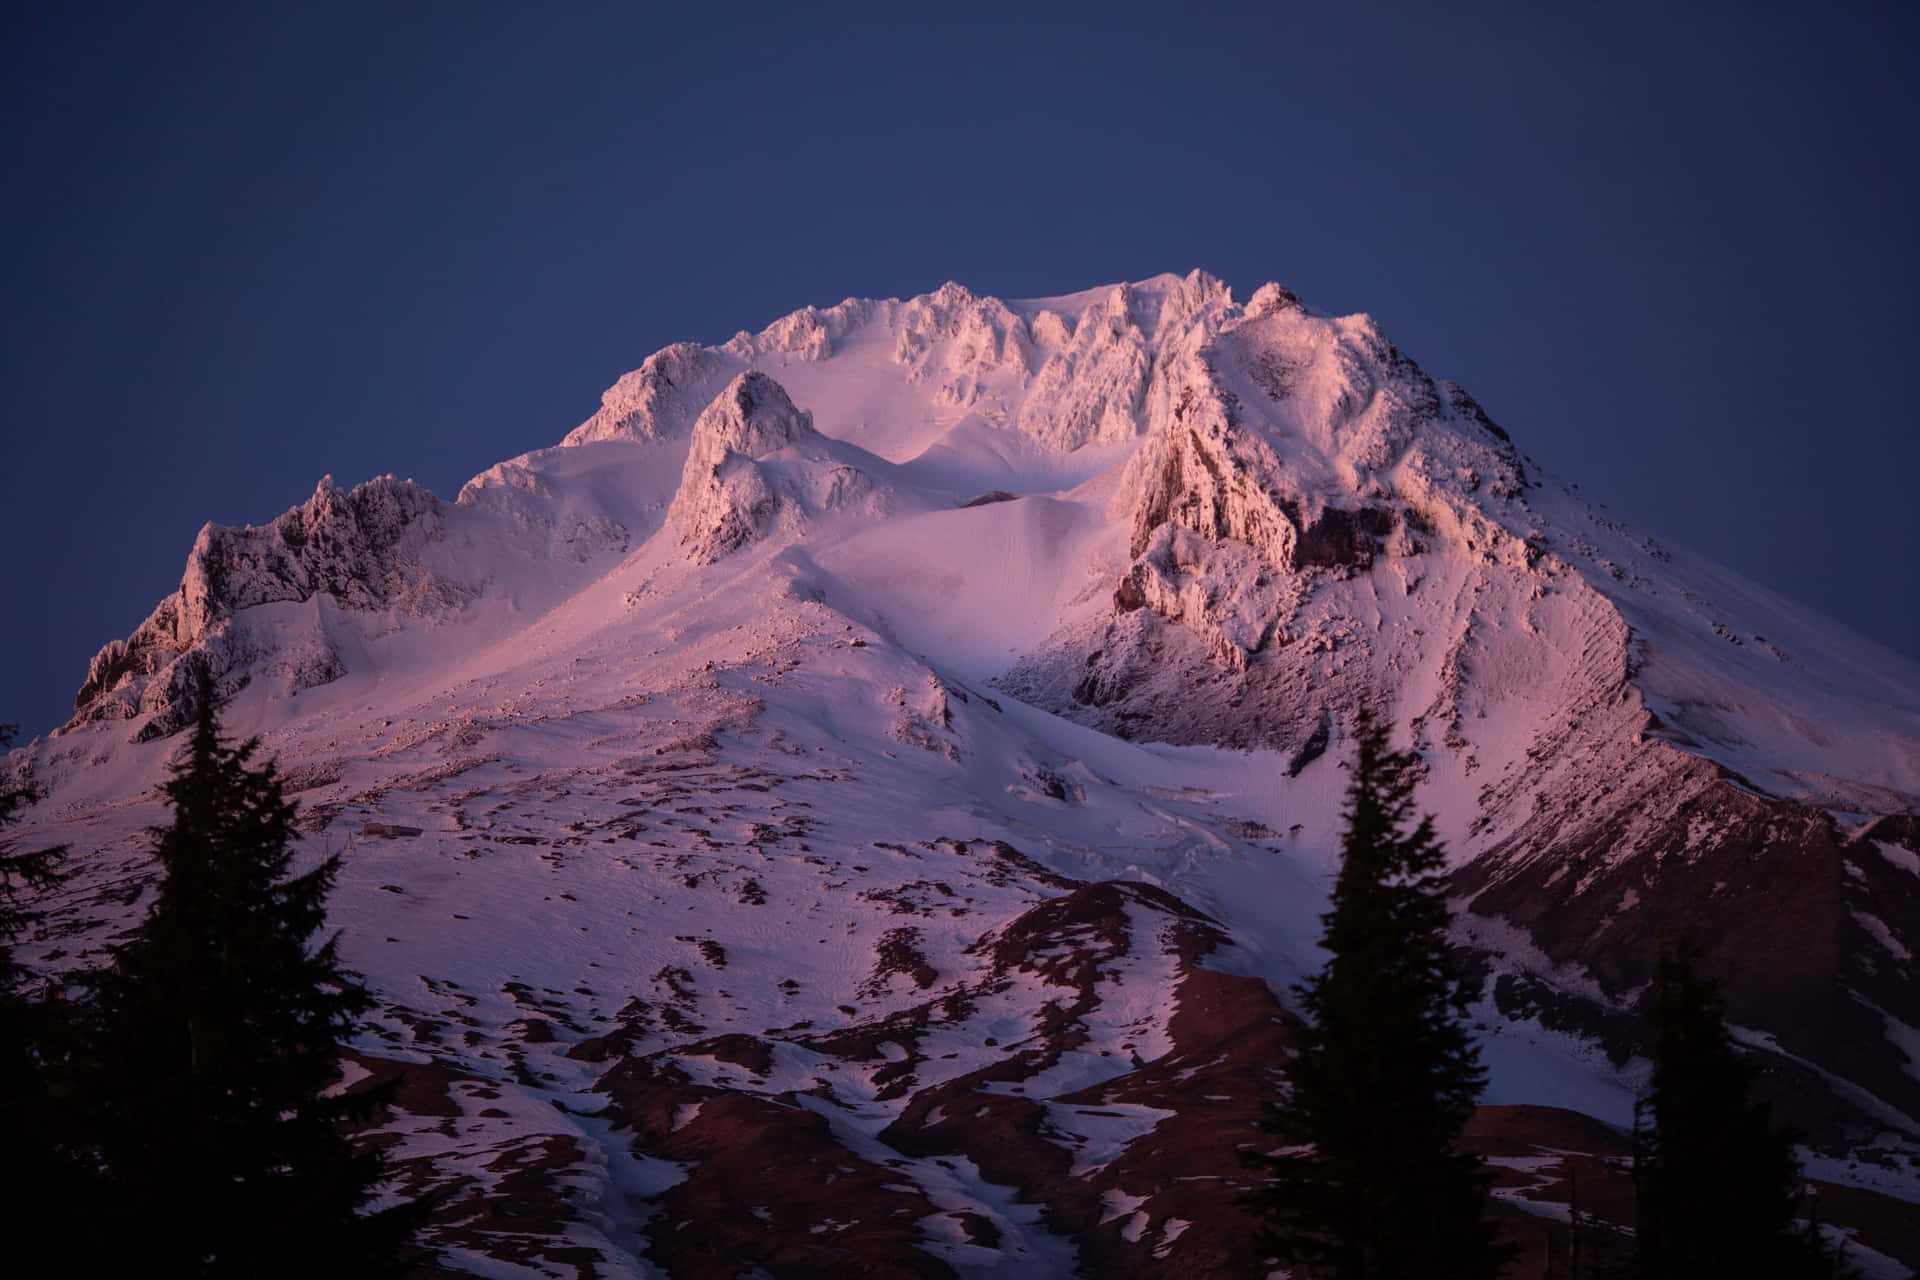 A Mountain Peak Is Lit Up At Dusk